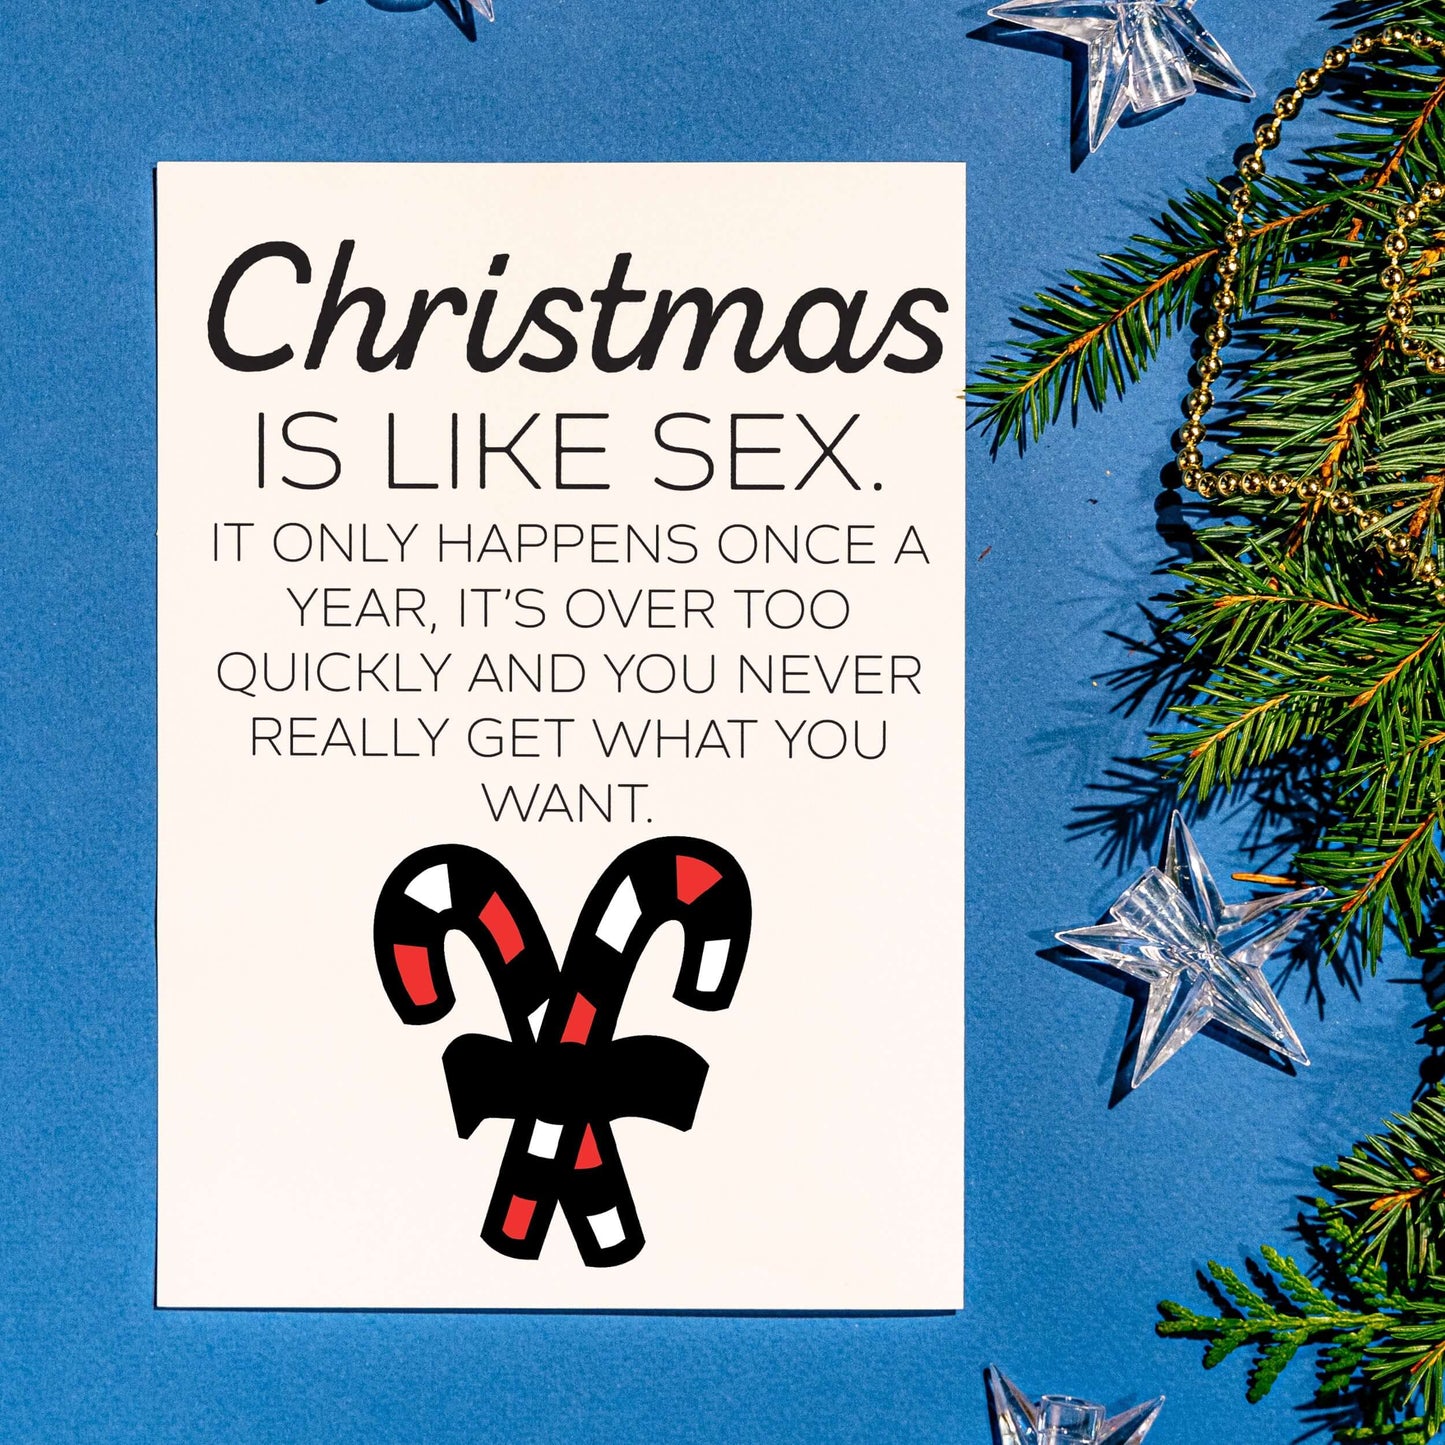 Little Kraken's Christmas is Like Sex Funny Candycane Christmas White A5 Greeting Card, Christmas Cards for £3.50 each